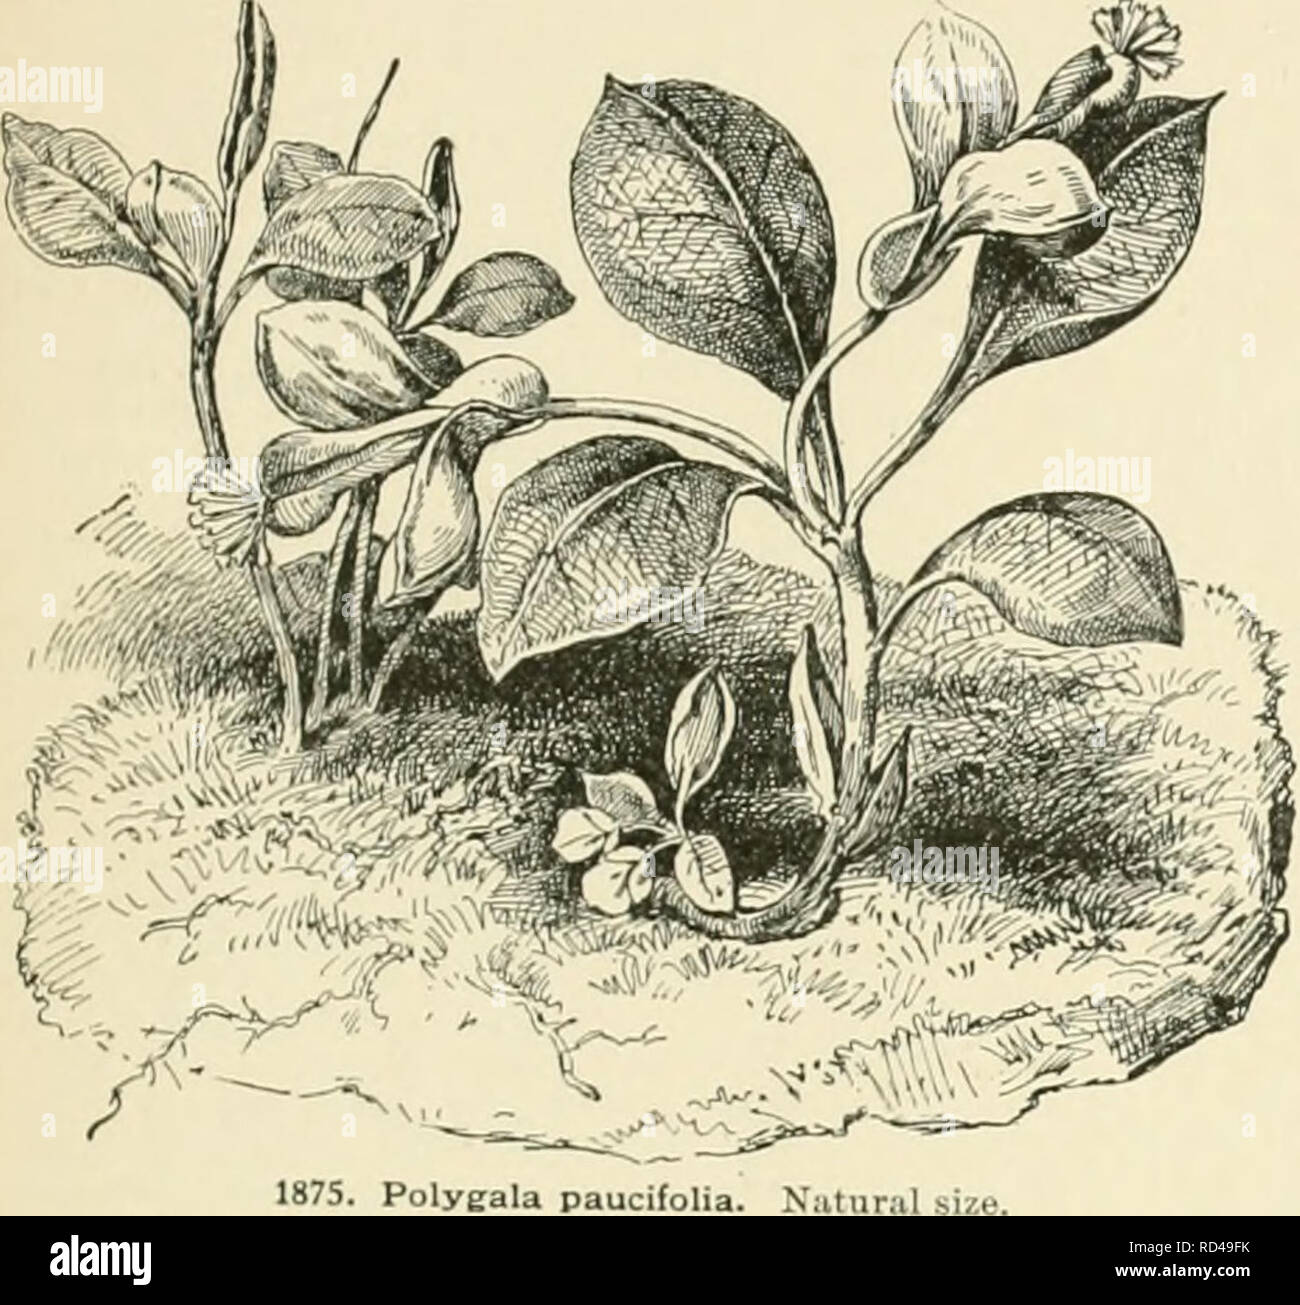 . Cyclopedia of American horticulture, comprising suggestions for cultivation of horticultural plants, descriptions of the species of fruits, vegetables, flowers, and ornamental plants sold in the United States and Canada, together with geographical and biographical sketches. Gardening. POLYGALA branched shrub, 3-8 ft. high, with large, showy Hs. near theenda of the branches: Ivs. flat, variable in sbape, but not subulate: lateral petals 2-lobe(i, the posterior lobe ear-shaped, reflexed. S. Africa.-Var. grandifldra, Hook. {P. fjrandifldra, Hort. and L.B.O. K):1227, not POLYGONATUM 1391. 1875.  Stock Photo